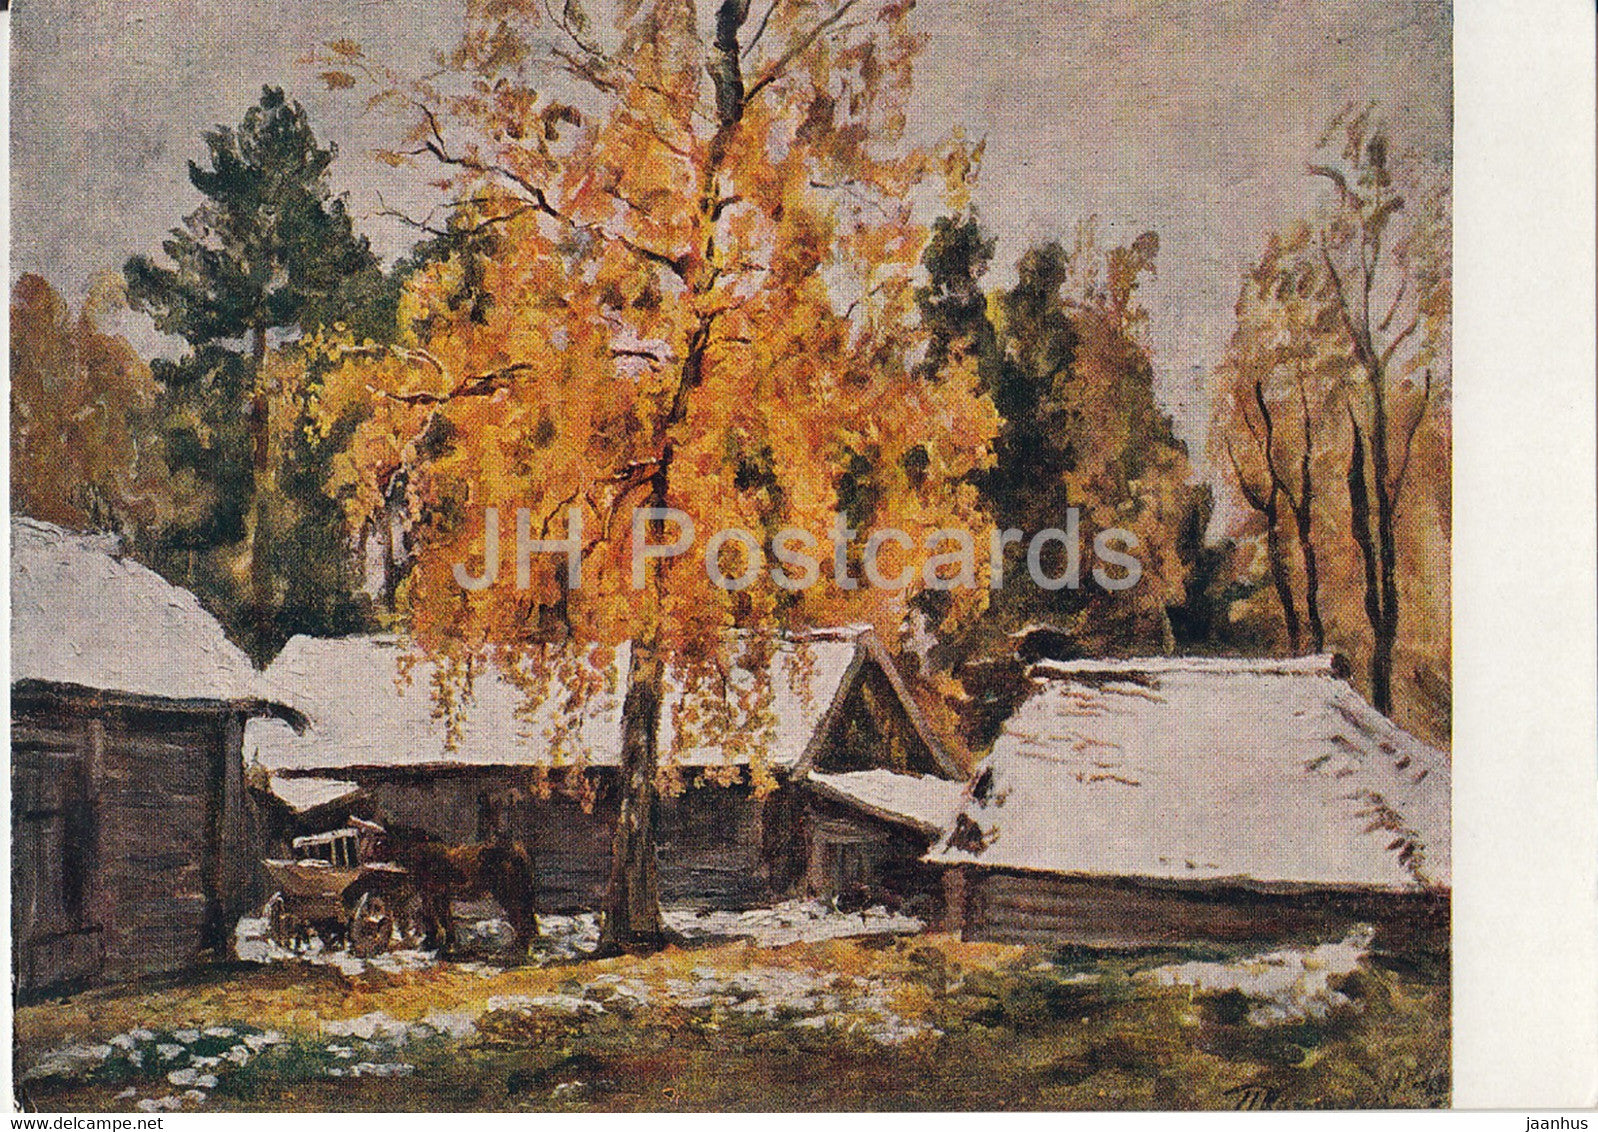 painting by P. Konchalovsky - First Snow - Russian art - 1960 - Russia USSR - unused - JH Postcards